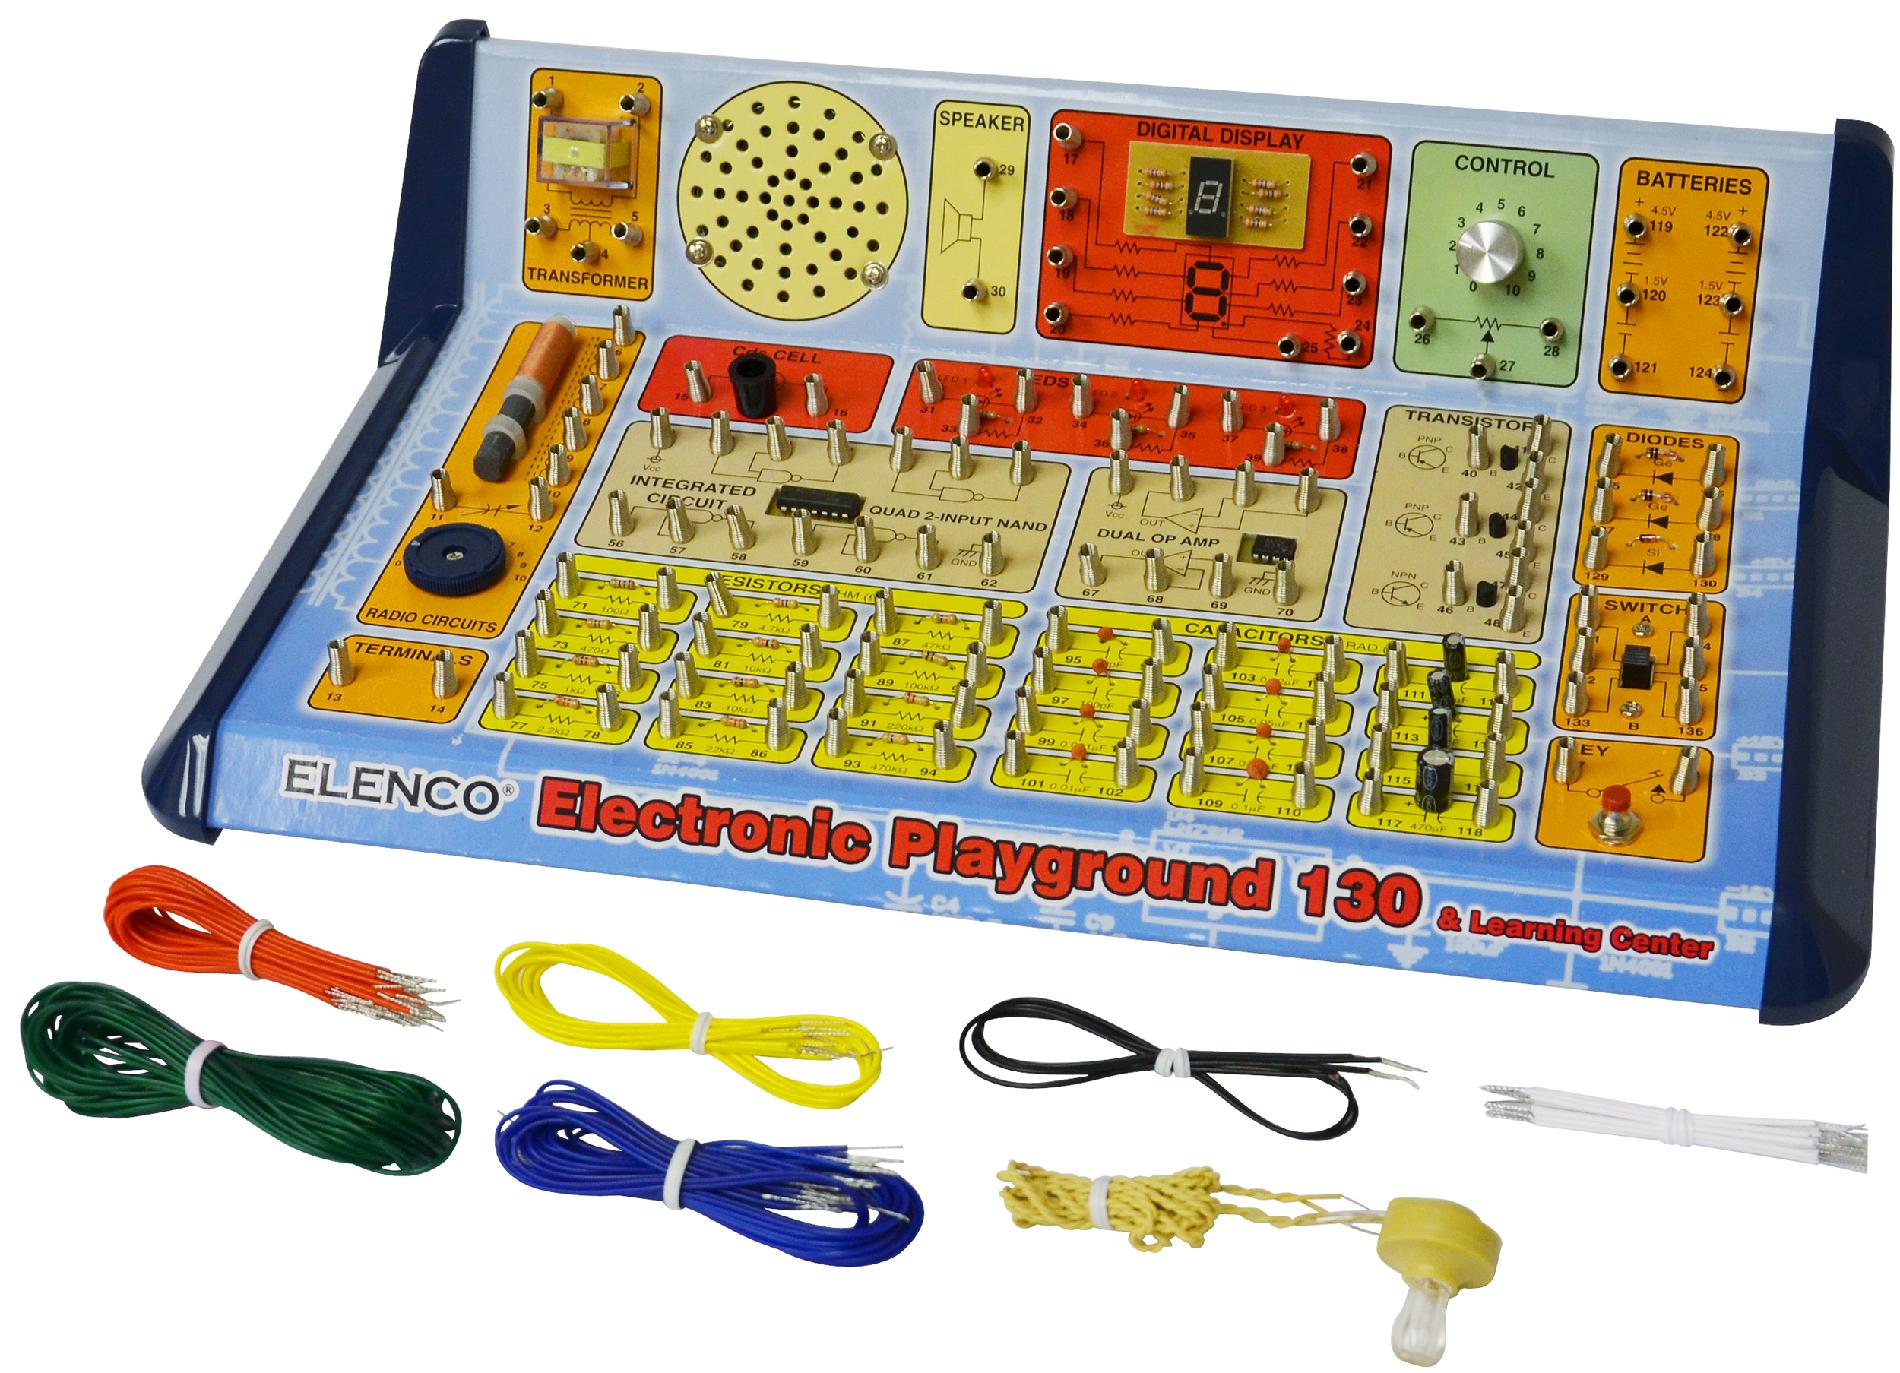 130-in-1 Electronic Playground